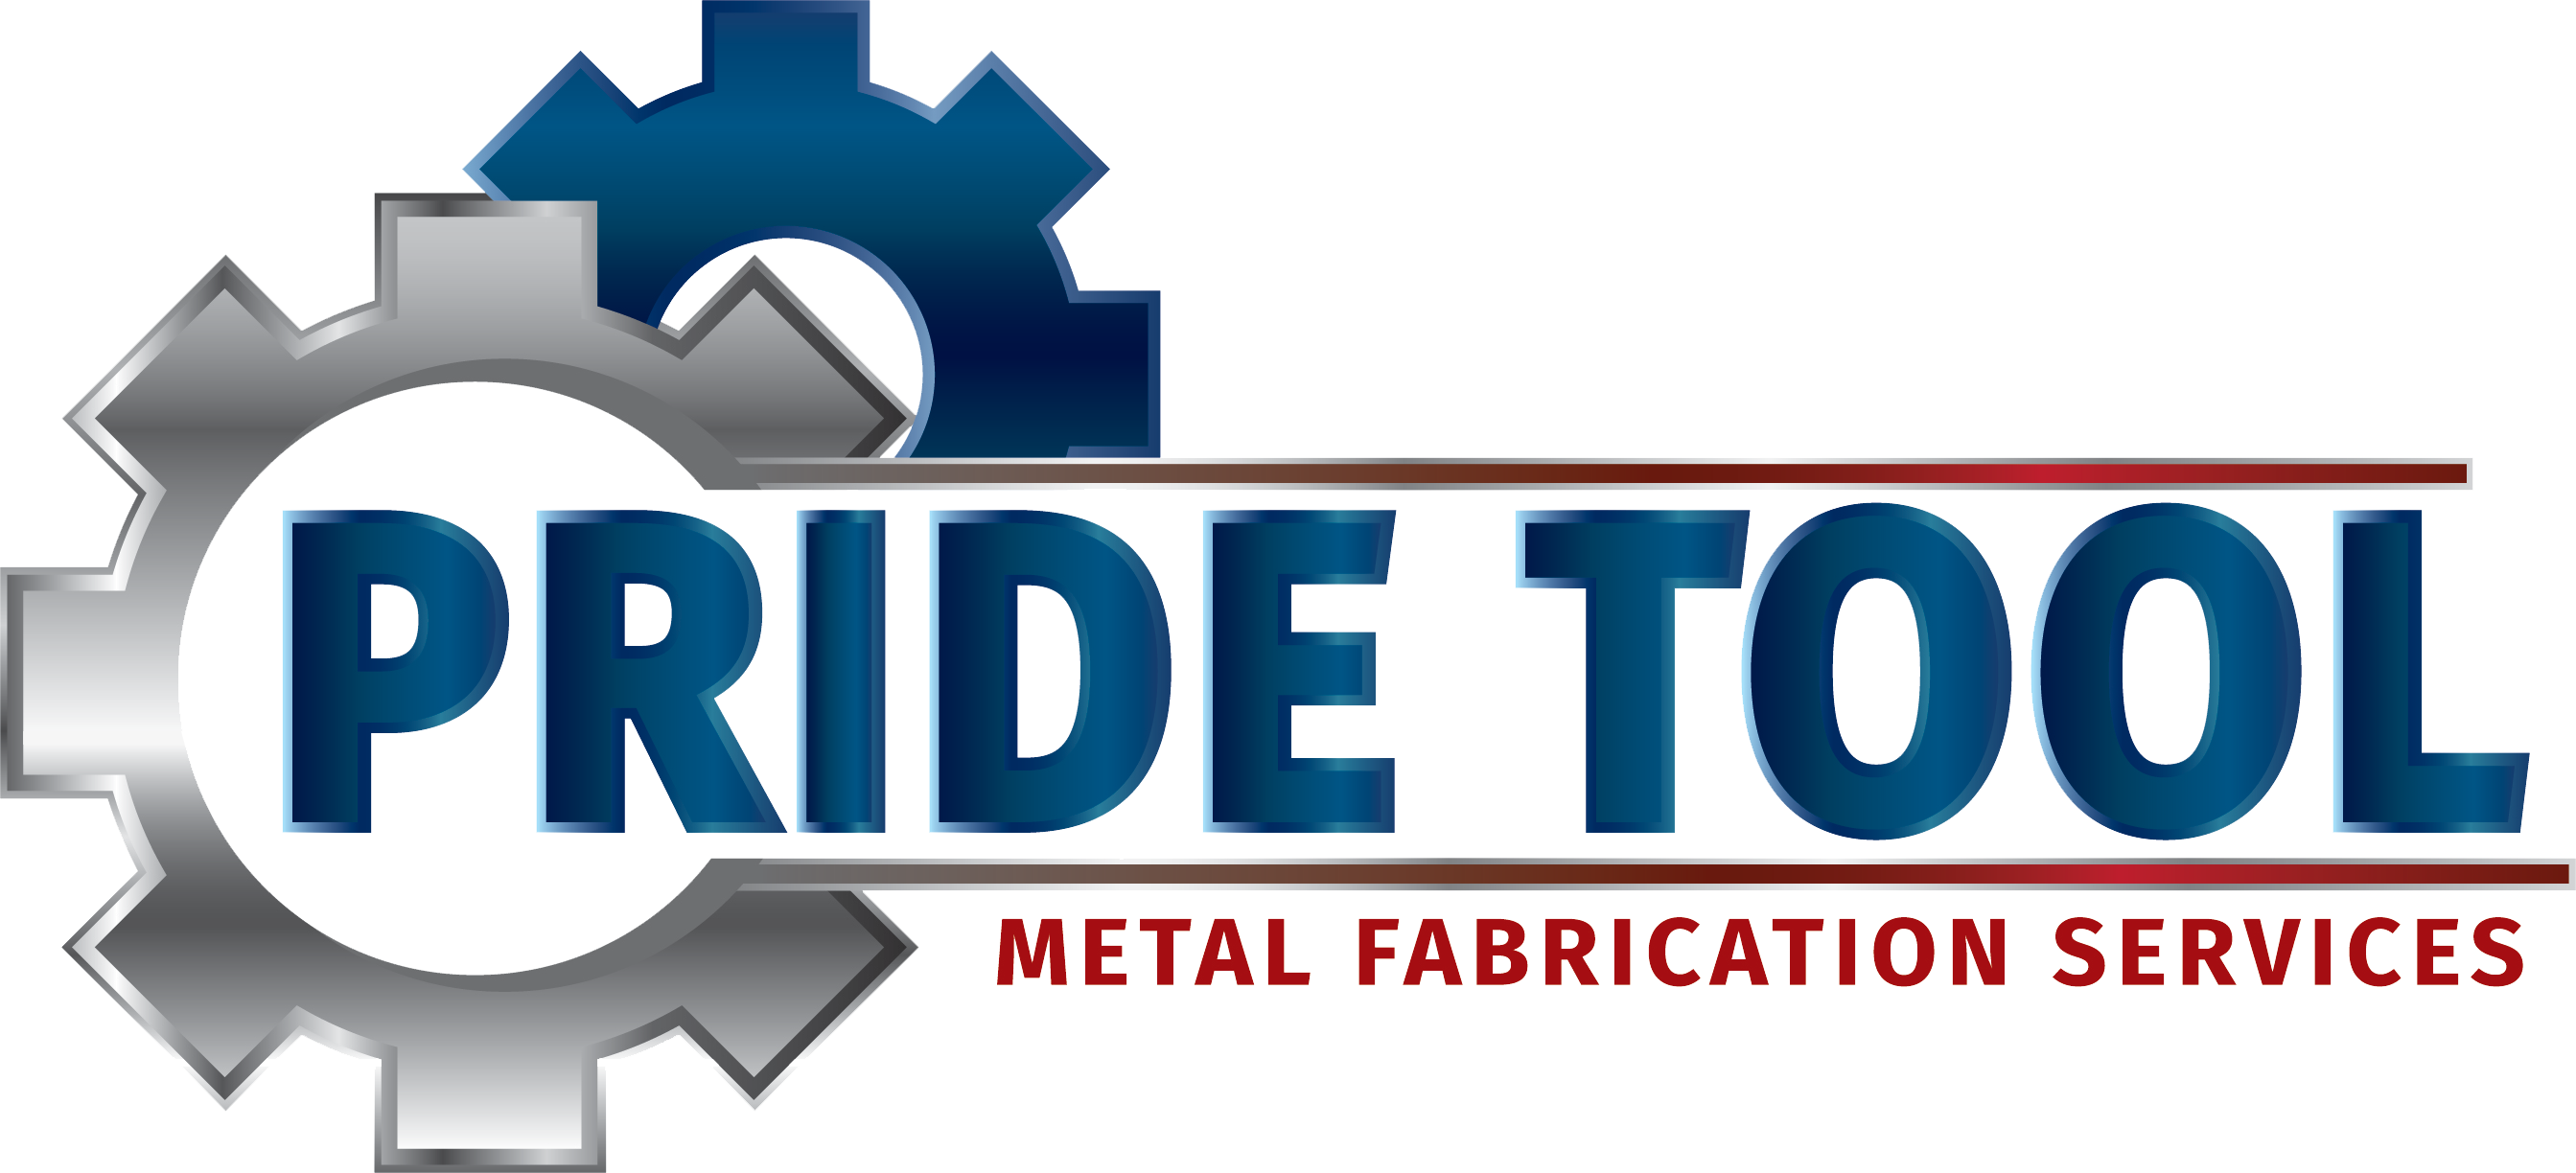 Pride Tool Metal Fabrication Services